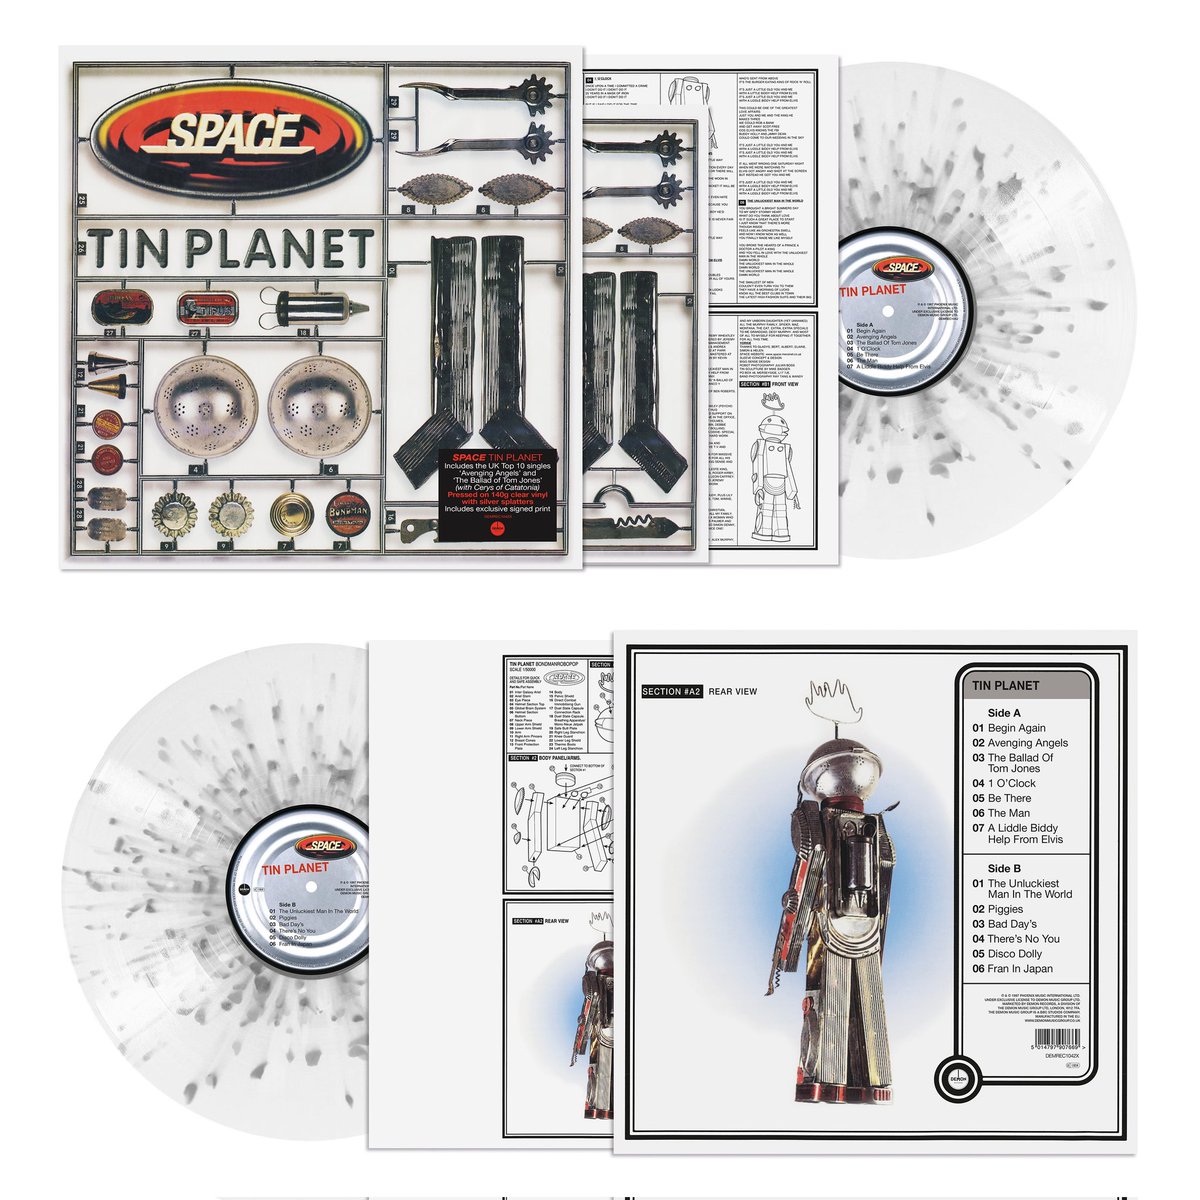 #Space #Tinplanet 25th anniversary edition #Albumday Link below lnk.to/spacetinplanet